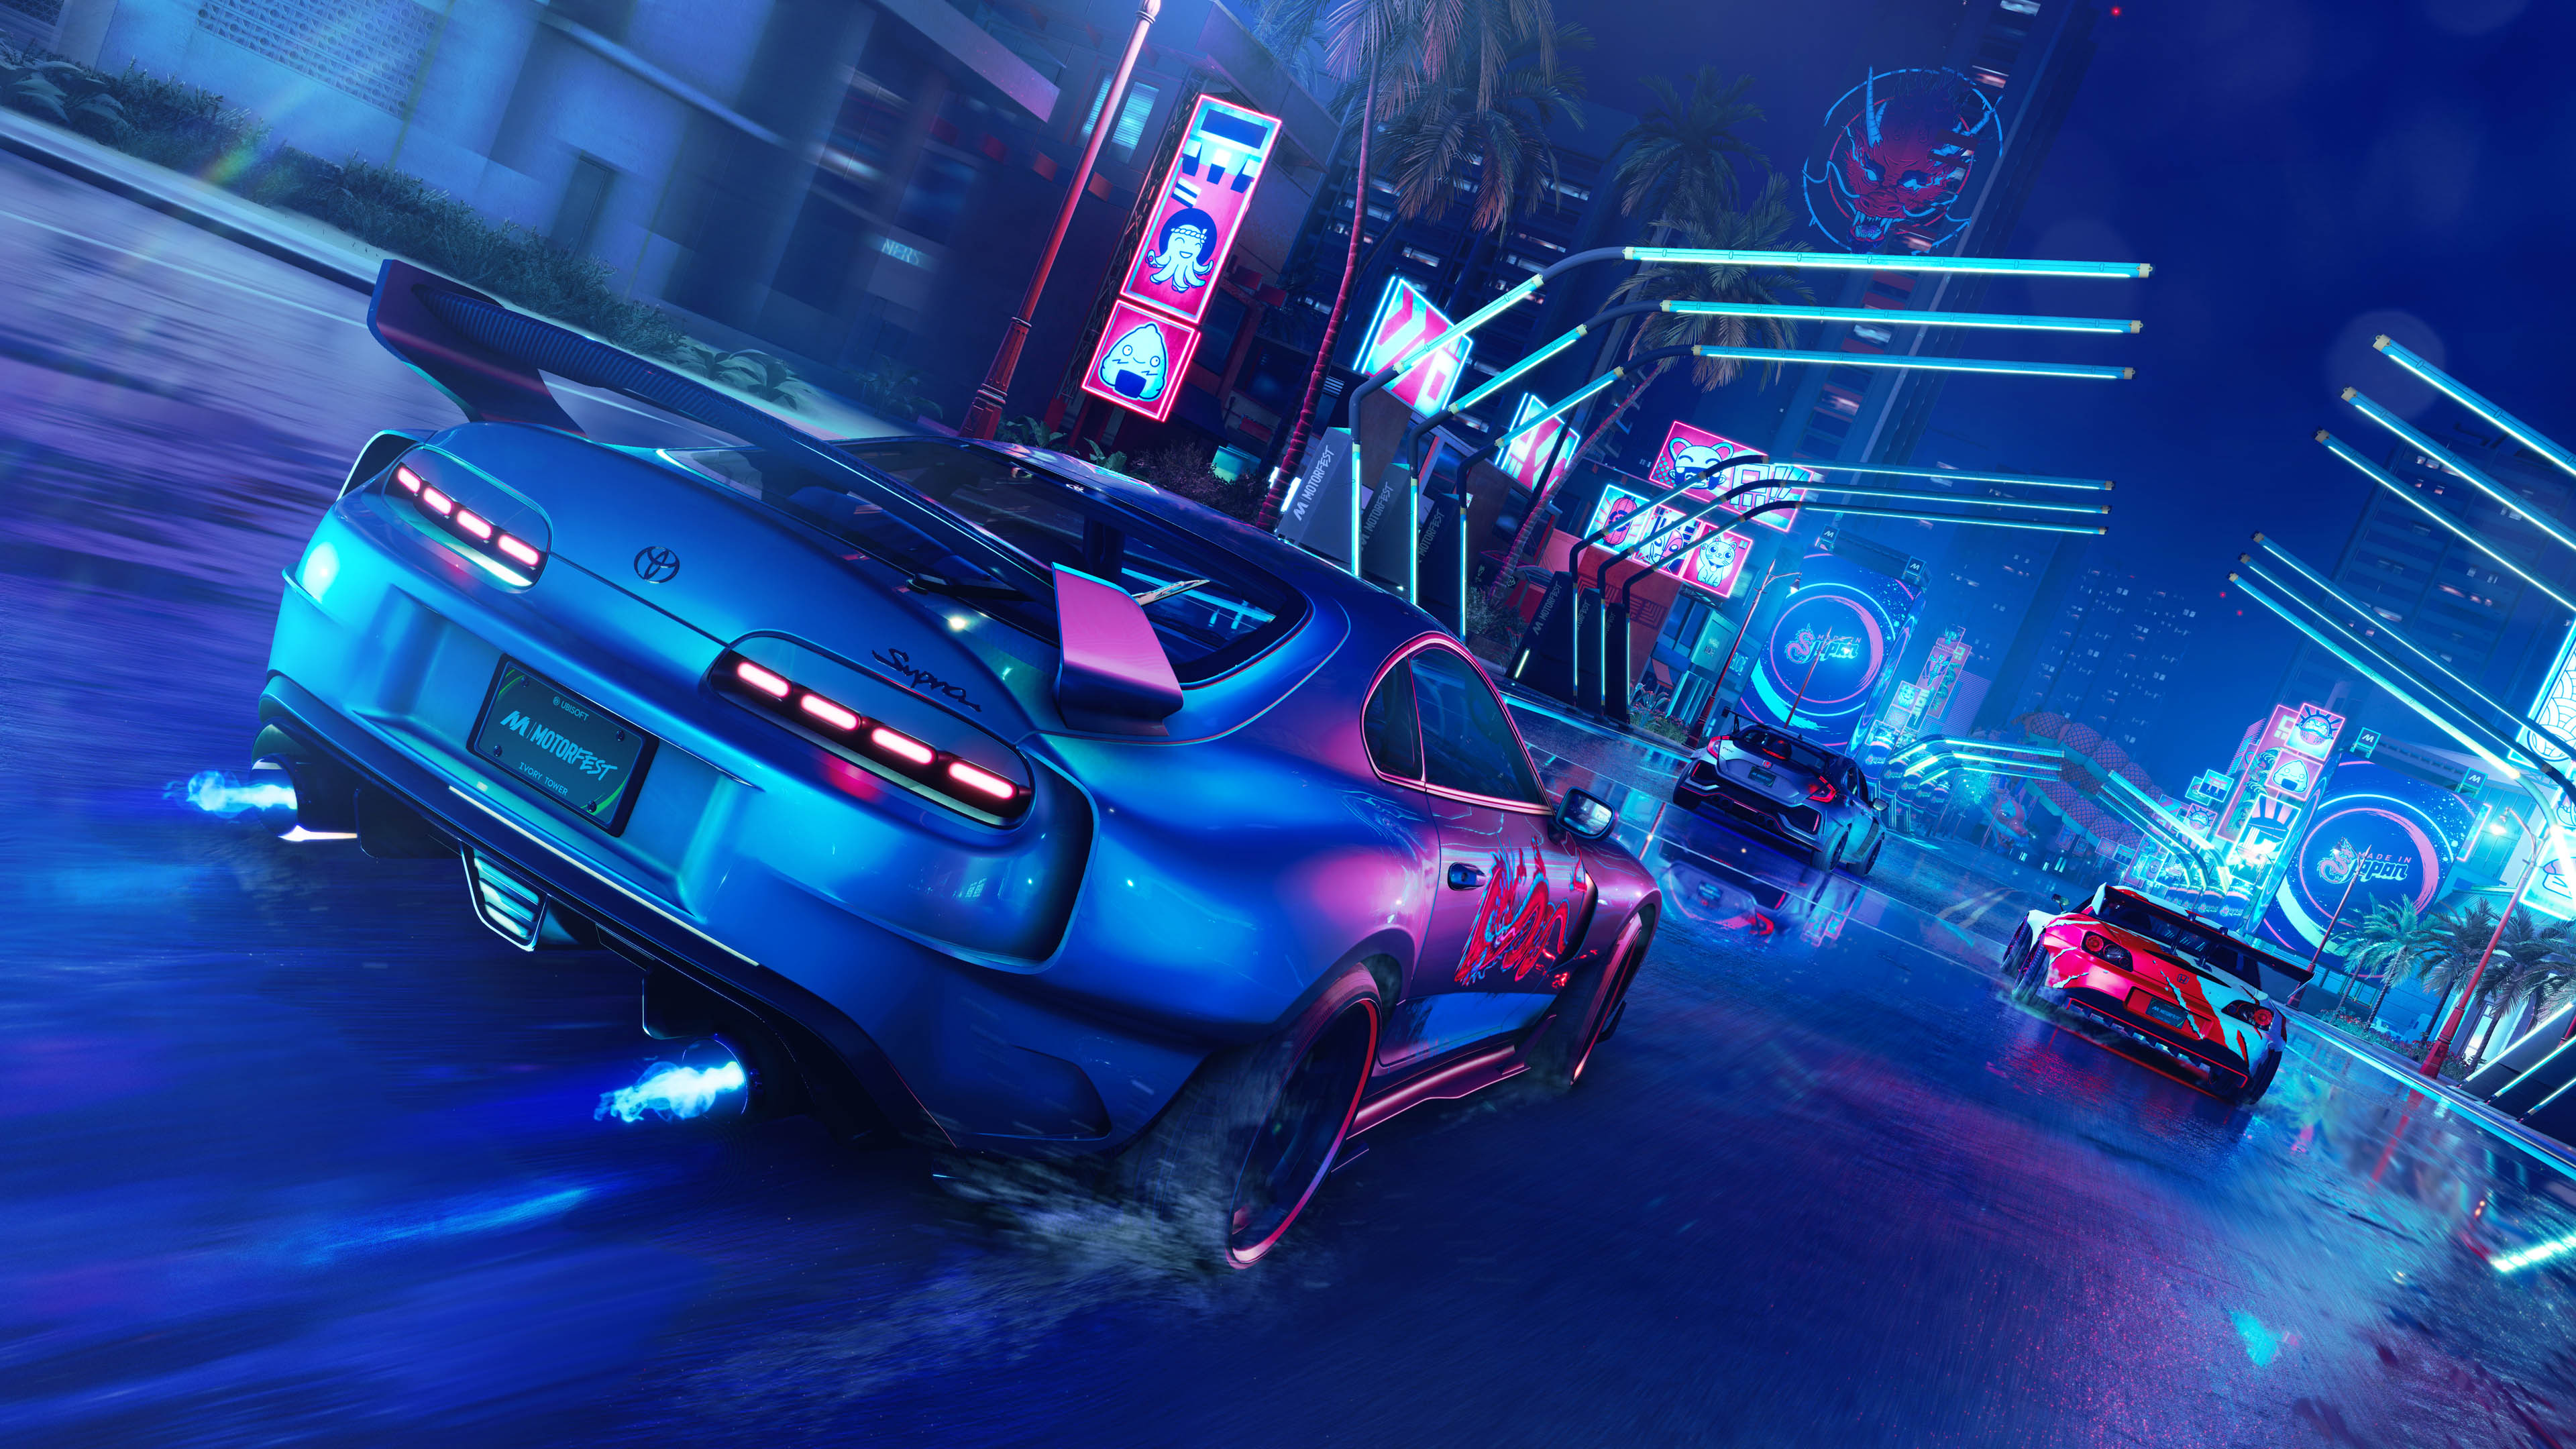 The Crew Motorfest Ultimate Edition on PS4 PS5 — price history,  screenshots, discounts • USA